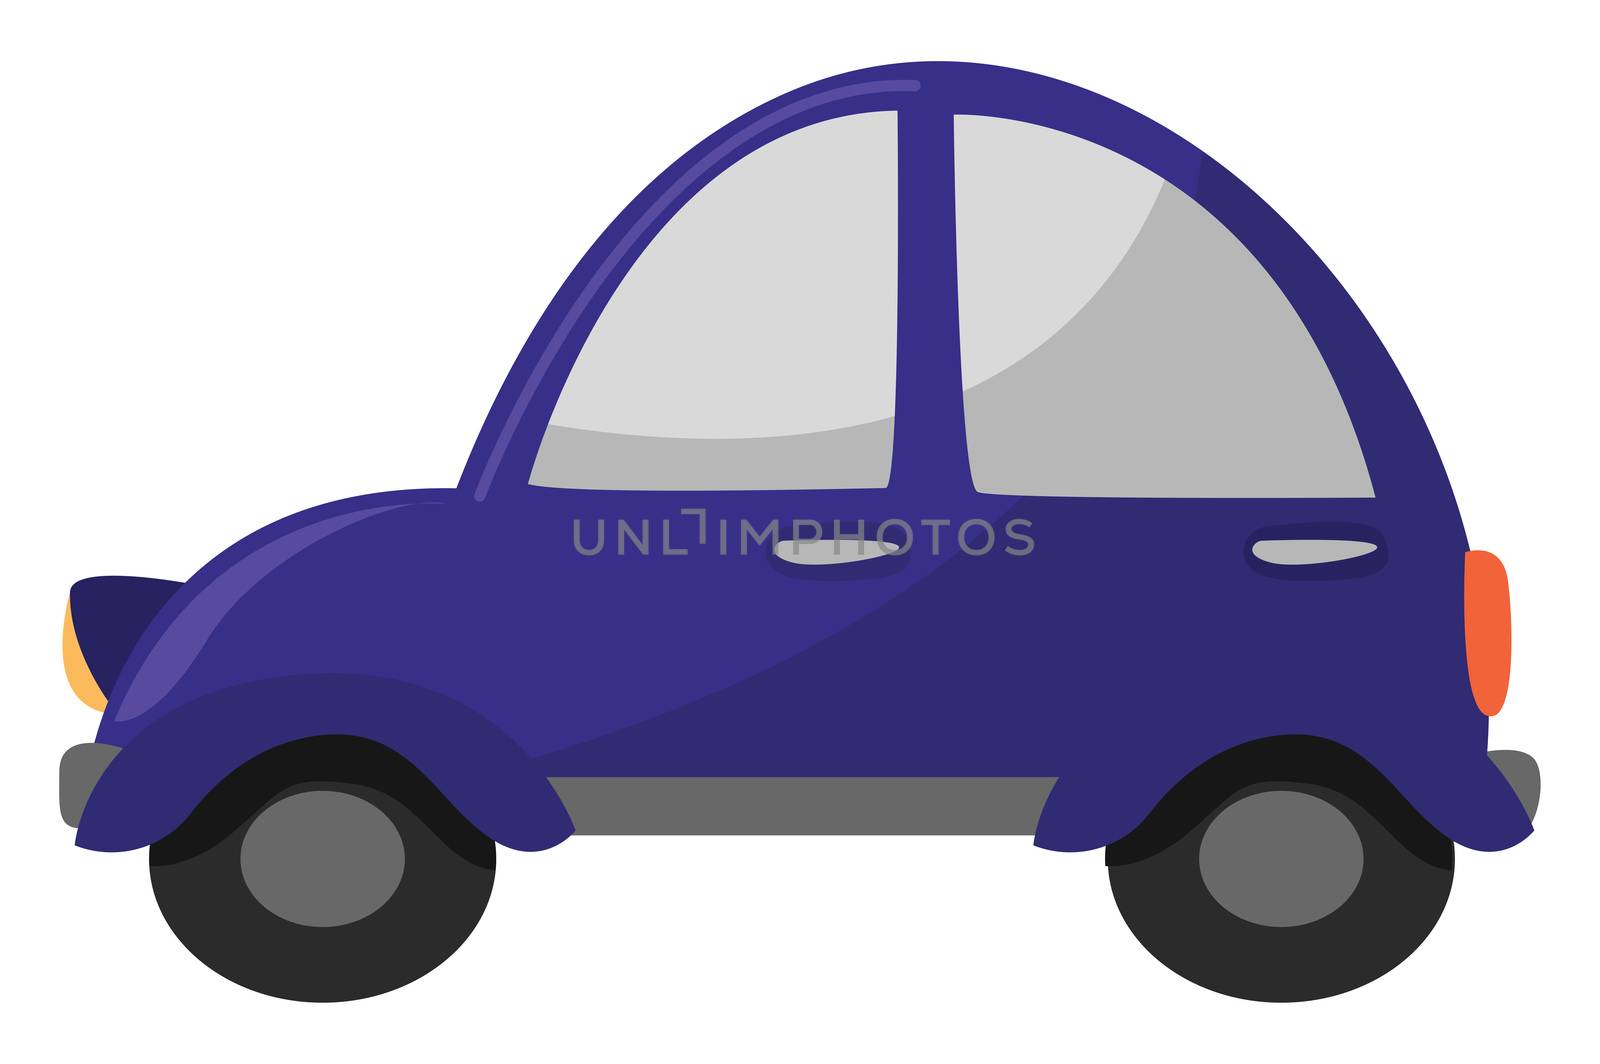 Small car , illustration, vector on white background